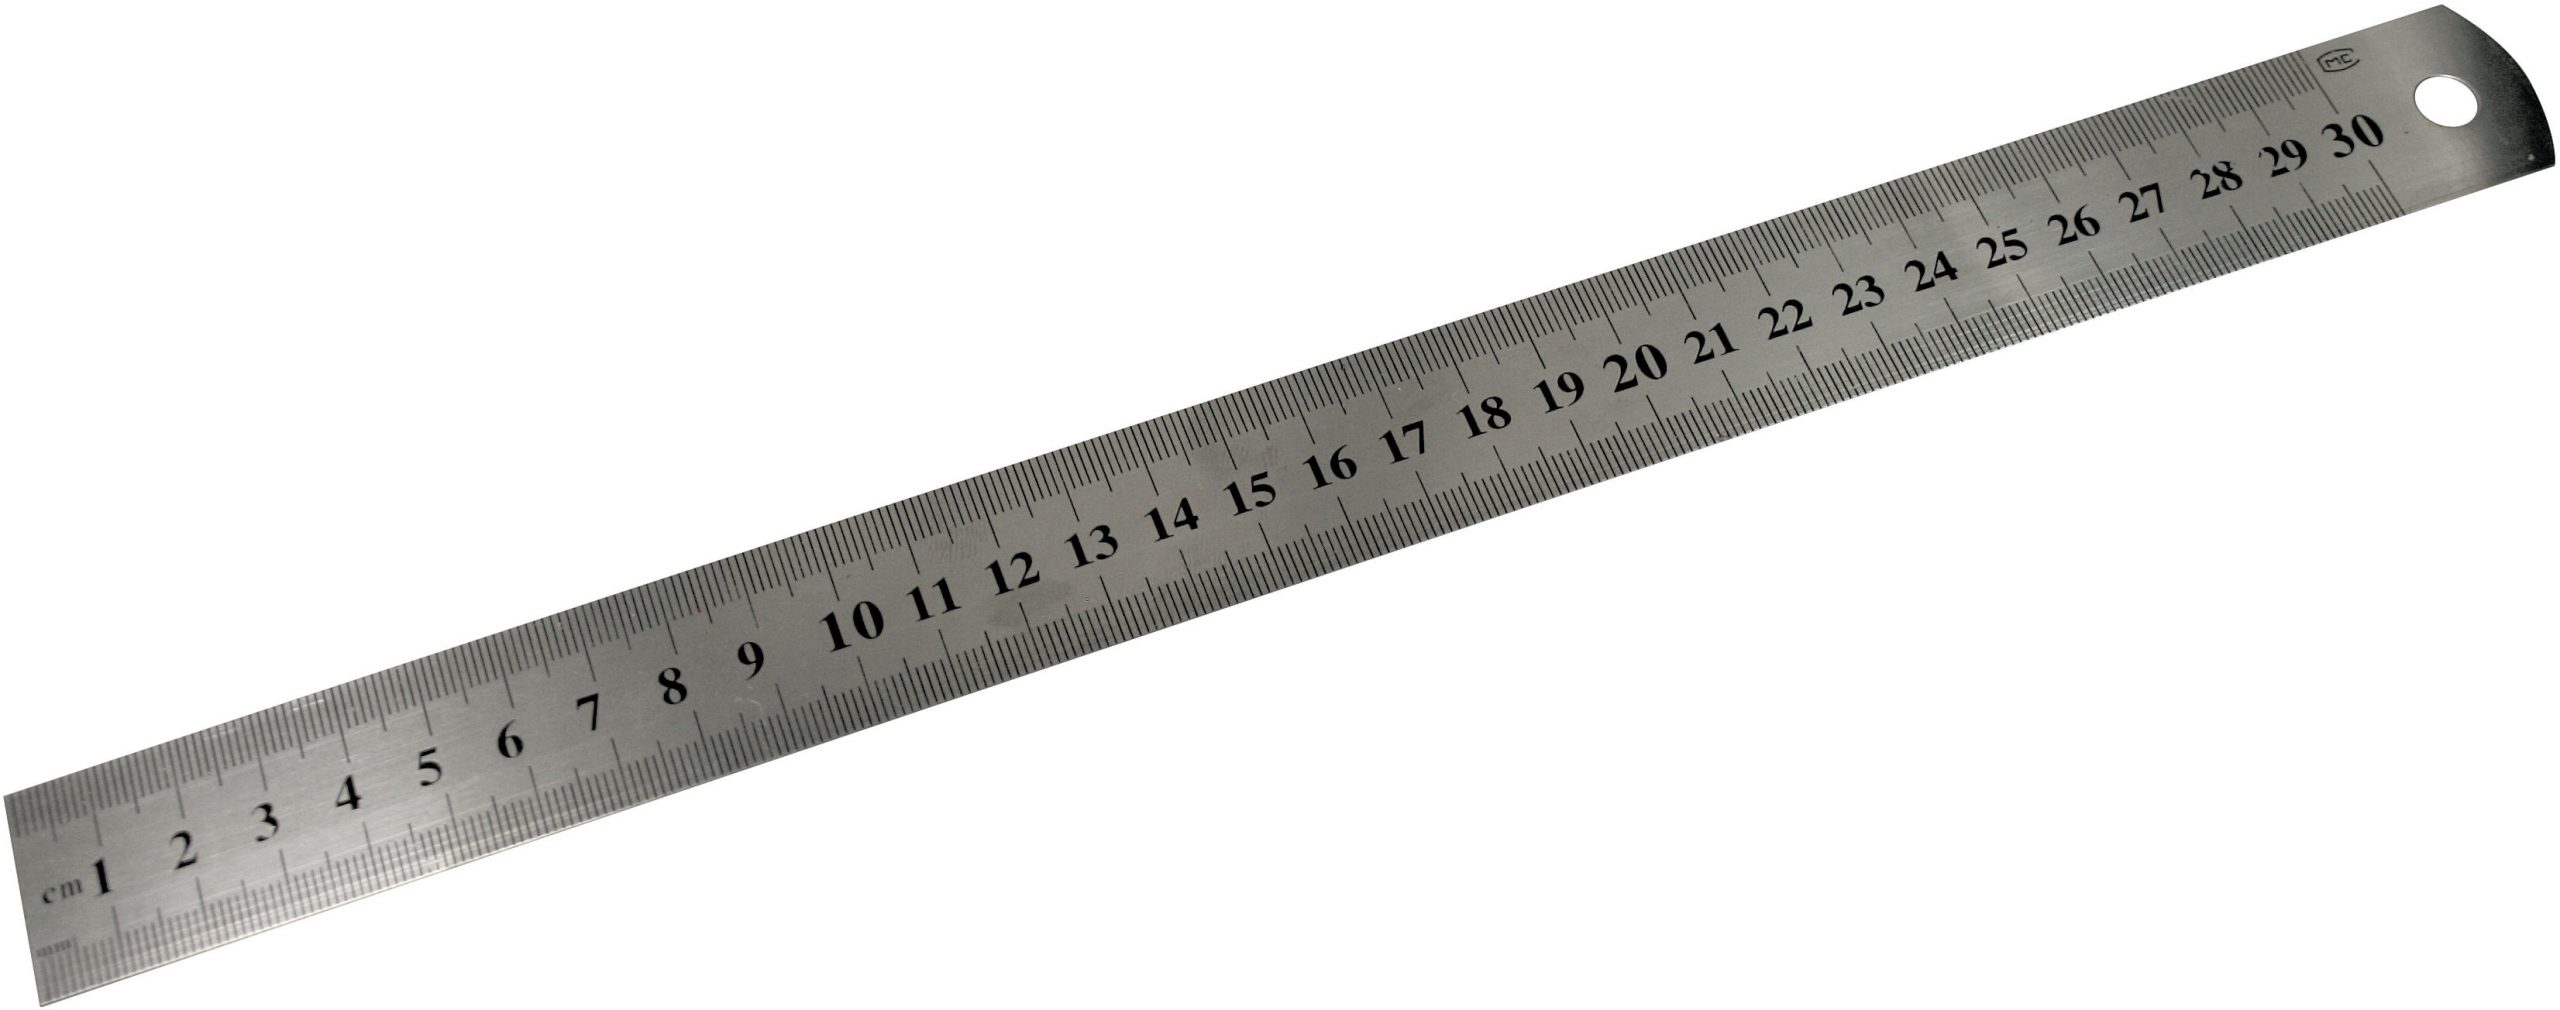 Stainless Steel Ruler - Complete Supplies